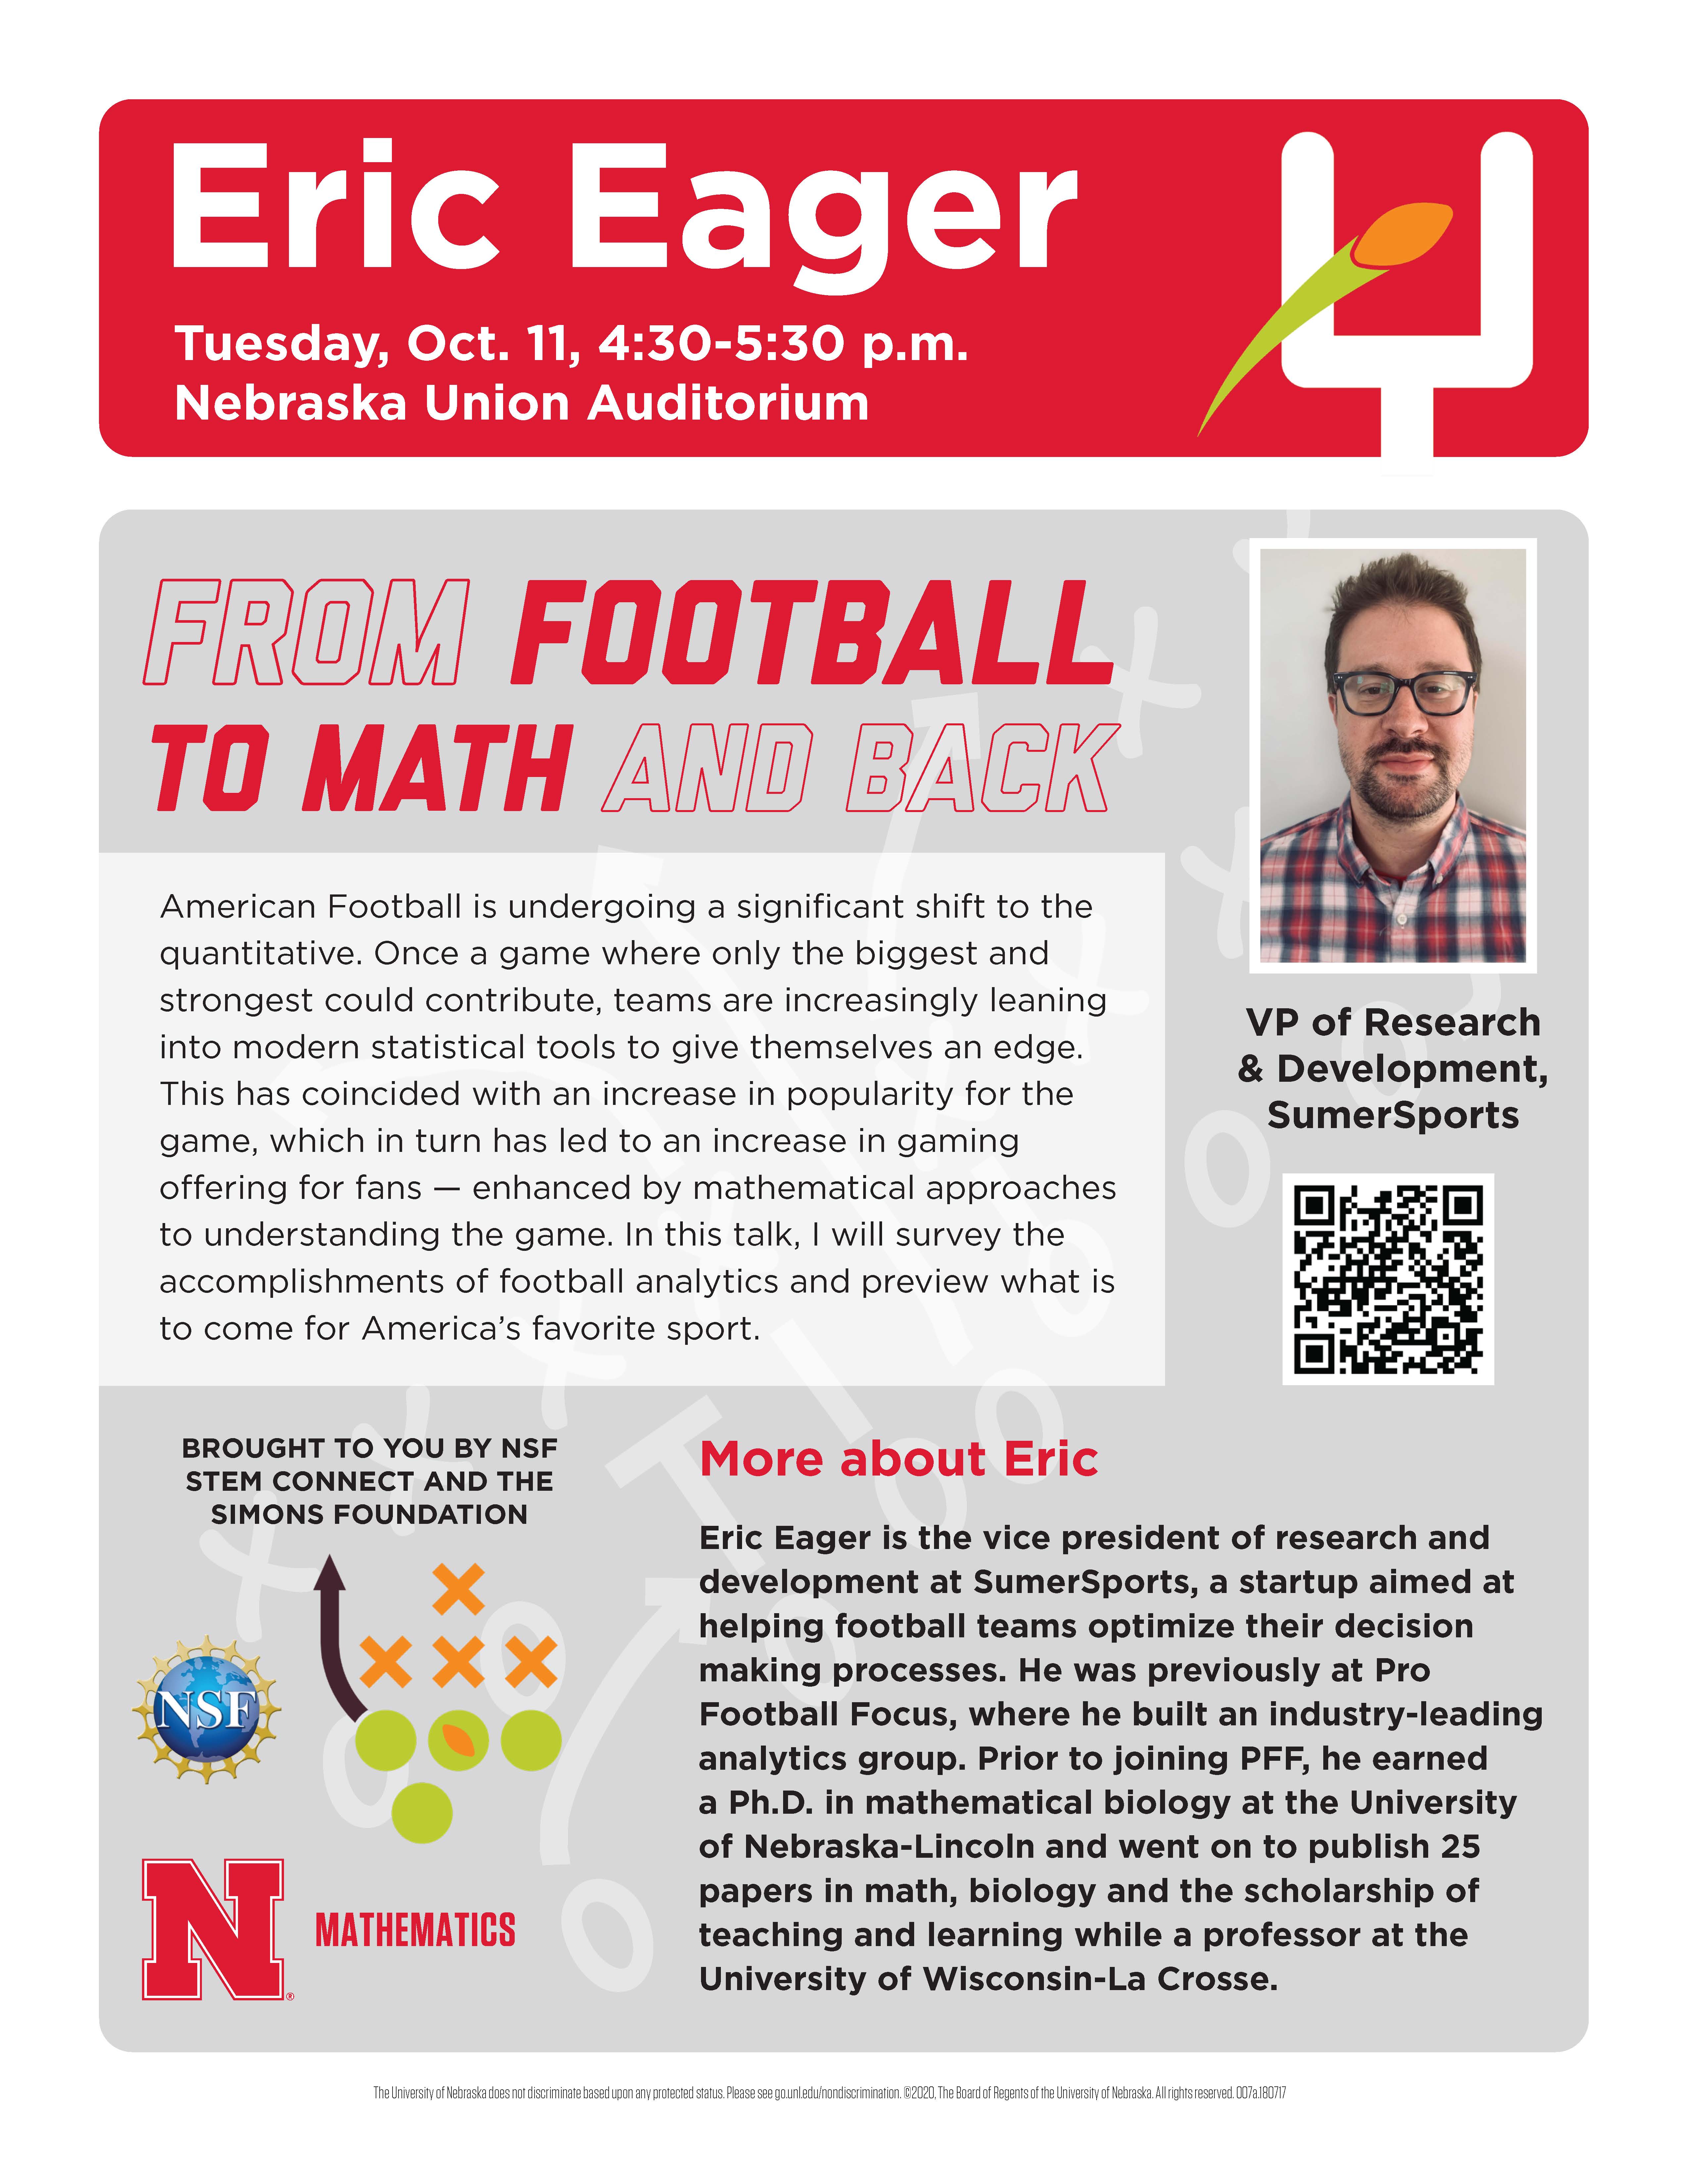 Mathematics alum Eric Eager, vice president of research and development at SumerSports, a startup aimed at helping football teams optimize their decision-making processes, will discuss his career of linking football and mathematics on Tuesday, Oct. 11.